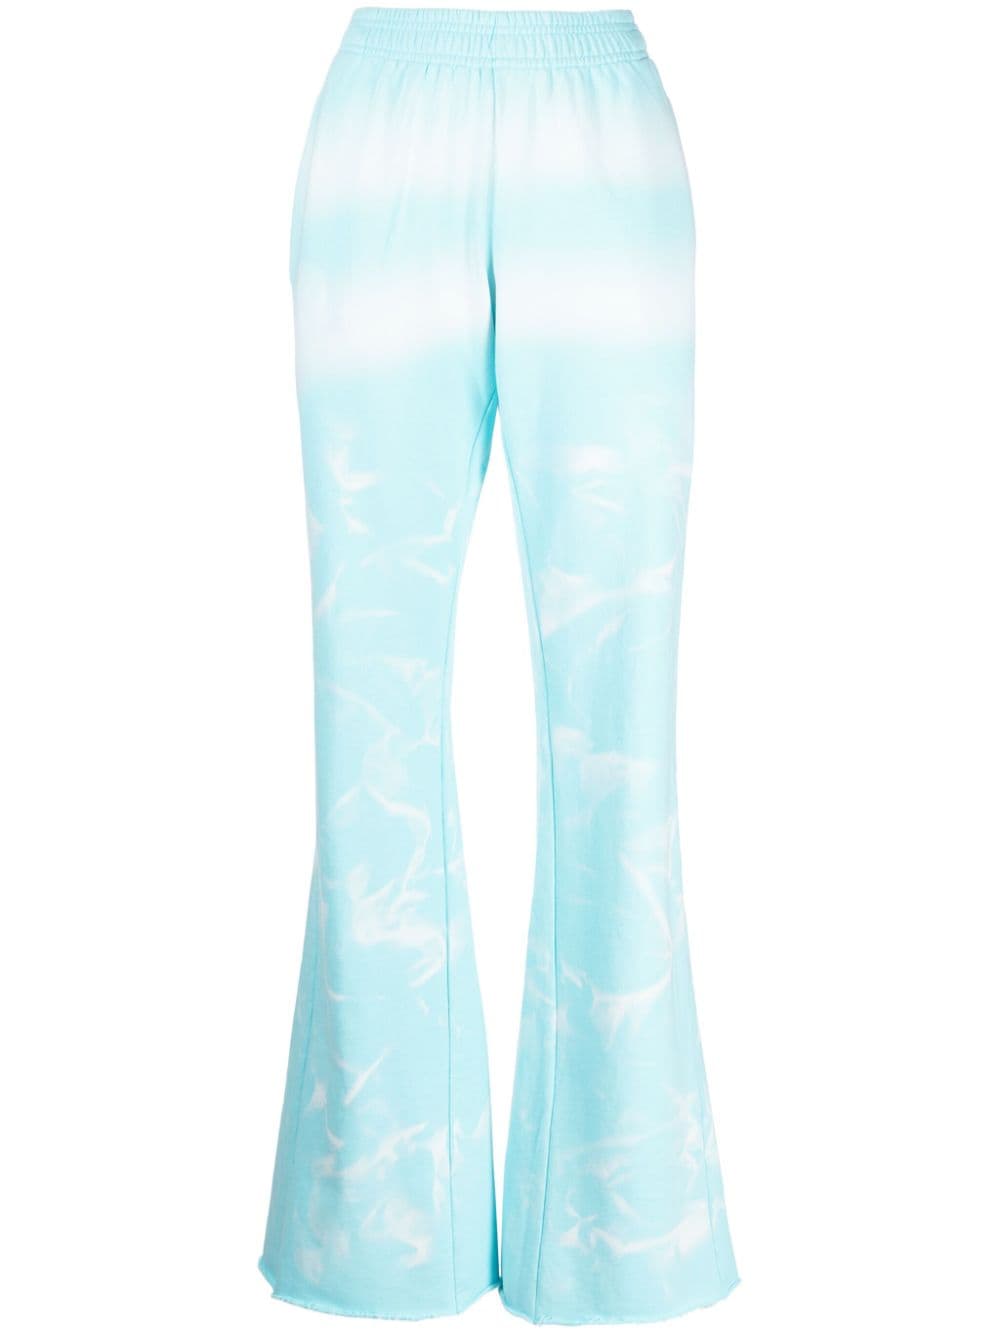 Logo embroidered tie dye cotton flayed pants